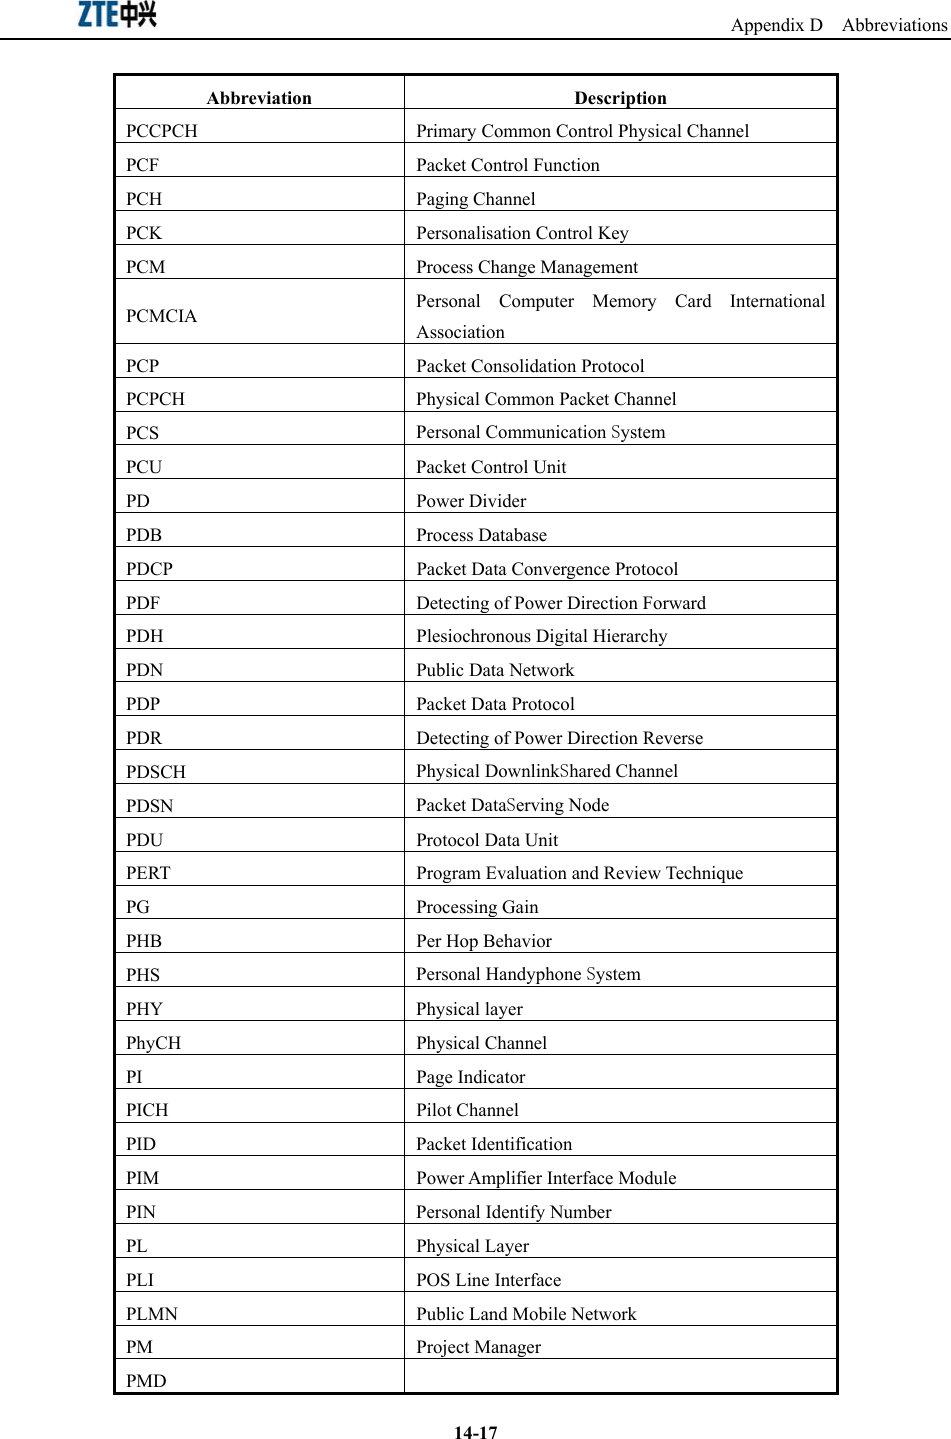                                                              Appendix D  Abbreviations  14-17Abbreviation Description PCCPCH  Primary Common Control Physical Channel PCF  Packet Control Function PCH Paging Channel PCK  Personalisation Control Key PCM Process Change Management PCMCIA  Personal Computer Memory Card International Association PCP  Packet Consolidation Protocol PCPCH  Physical Common Packet Channel PCS  Personal Communication System PCU  Packet Control Unit PD Power Divider PDB Process Database PDCP  Packet Data Convergence Protocol PDF  Detecting of Power Direction Forward PDH  Plesiochronous Digital Hierarchy PDN  Public Data Network PDP  Packet Data Protocol PDR  Detecting of Power Direction Reverse PDSCH  Physical DownlinkShared Channel PDSN  Packet DataServing Node PDU  Protocol Data Unit PERT  Program Evaluation and Review Technique PG Processing Gain PHB  Per Hop Behavior PHS  Personal Handyphone System PHY Physical layer PhyCH Physical Channel PI Page Indicator PICH Pilot Channel PID Packet Identification PIM  Power Amplifier Interface Module PIN  Personal Identify Number PL Physical Layer PLI  POS Line Interface PLMN  Public Land Mobile Network PM Project Manager PMD    